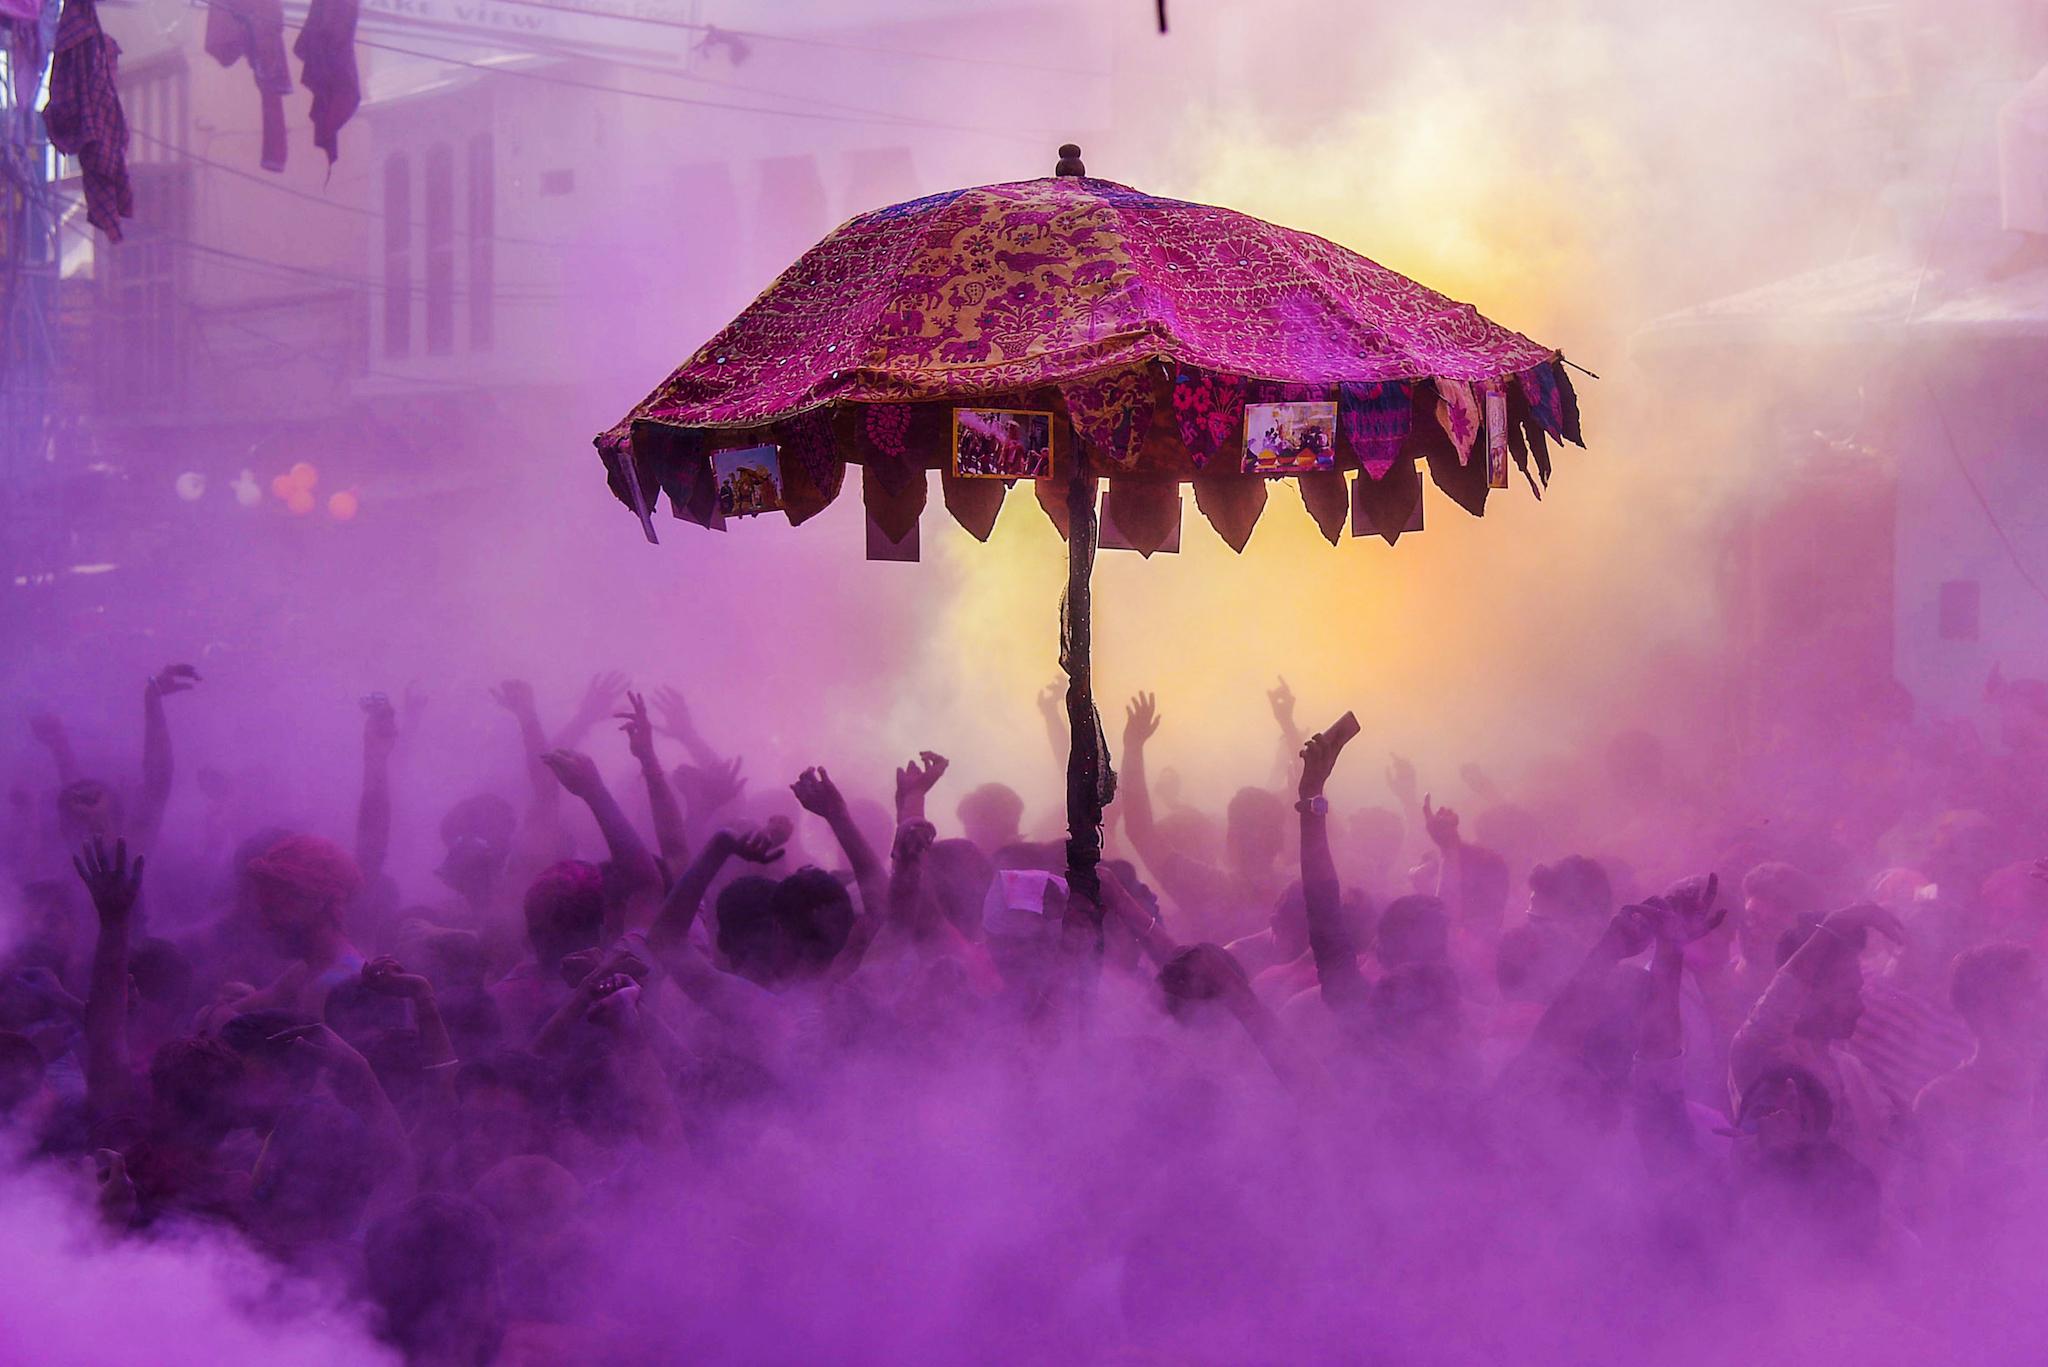 Indian devotees and foreign tourists take part in the "kapda phaar" or cloth tearing during Holi festival celebrations in Pushkar, in the Indian state of Rajasthan on March 2, 2018